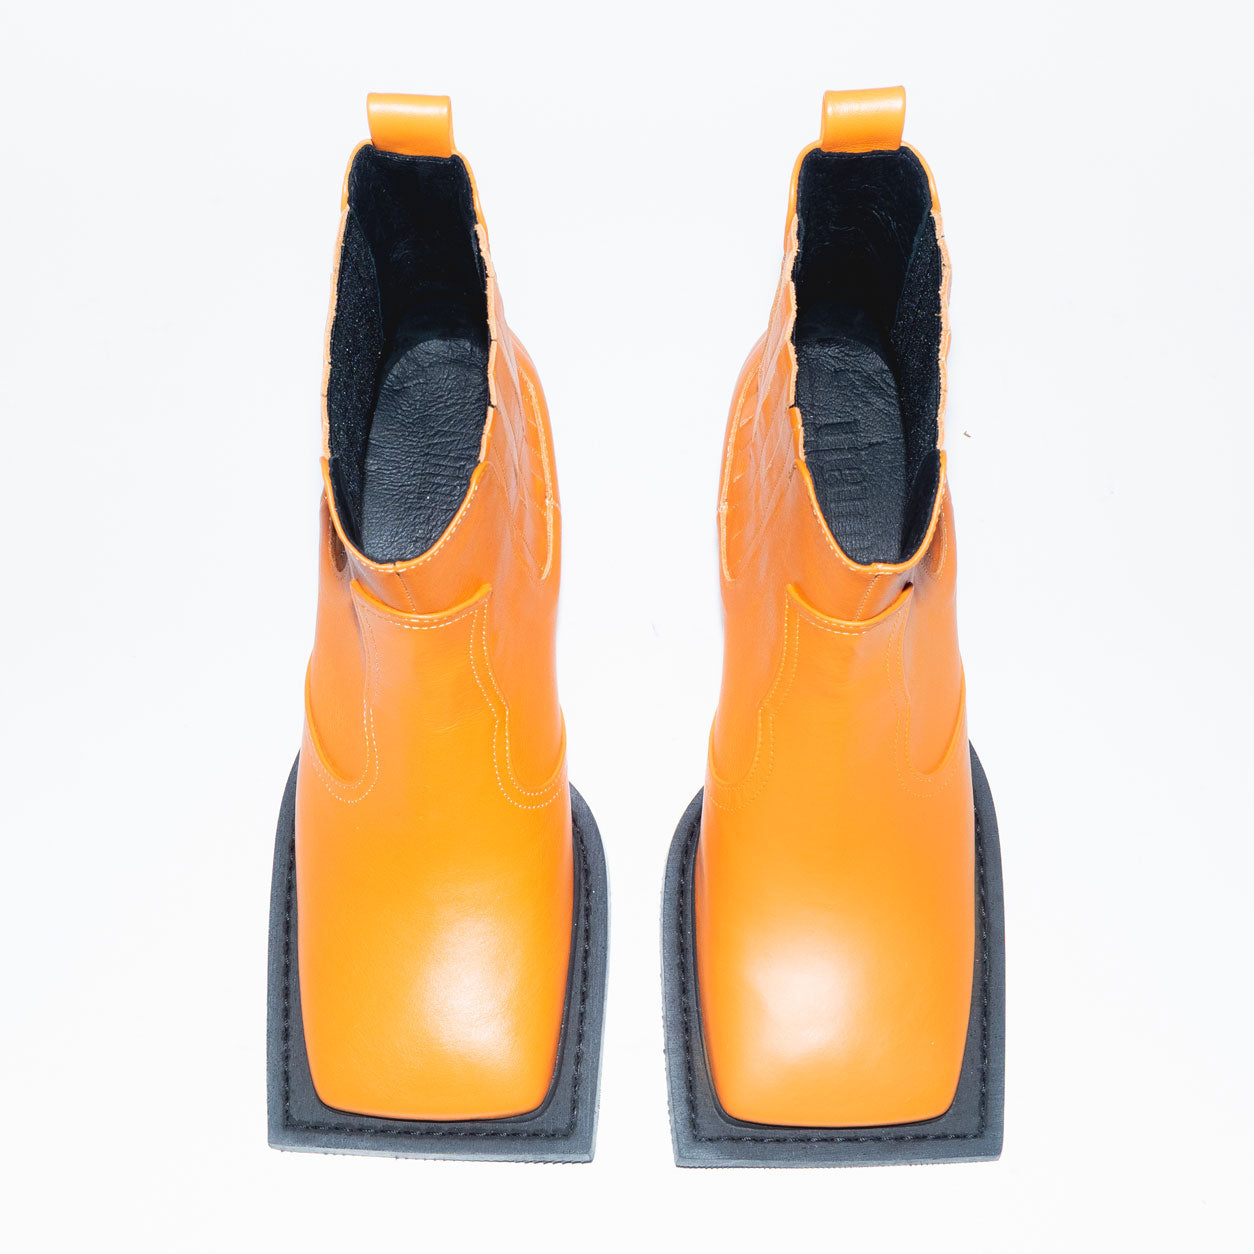 Archive Howler Ankle Boots in Orange Leather